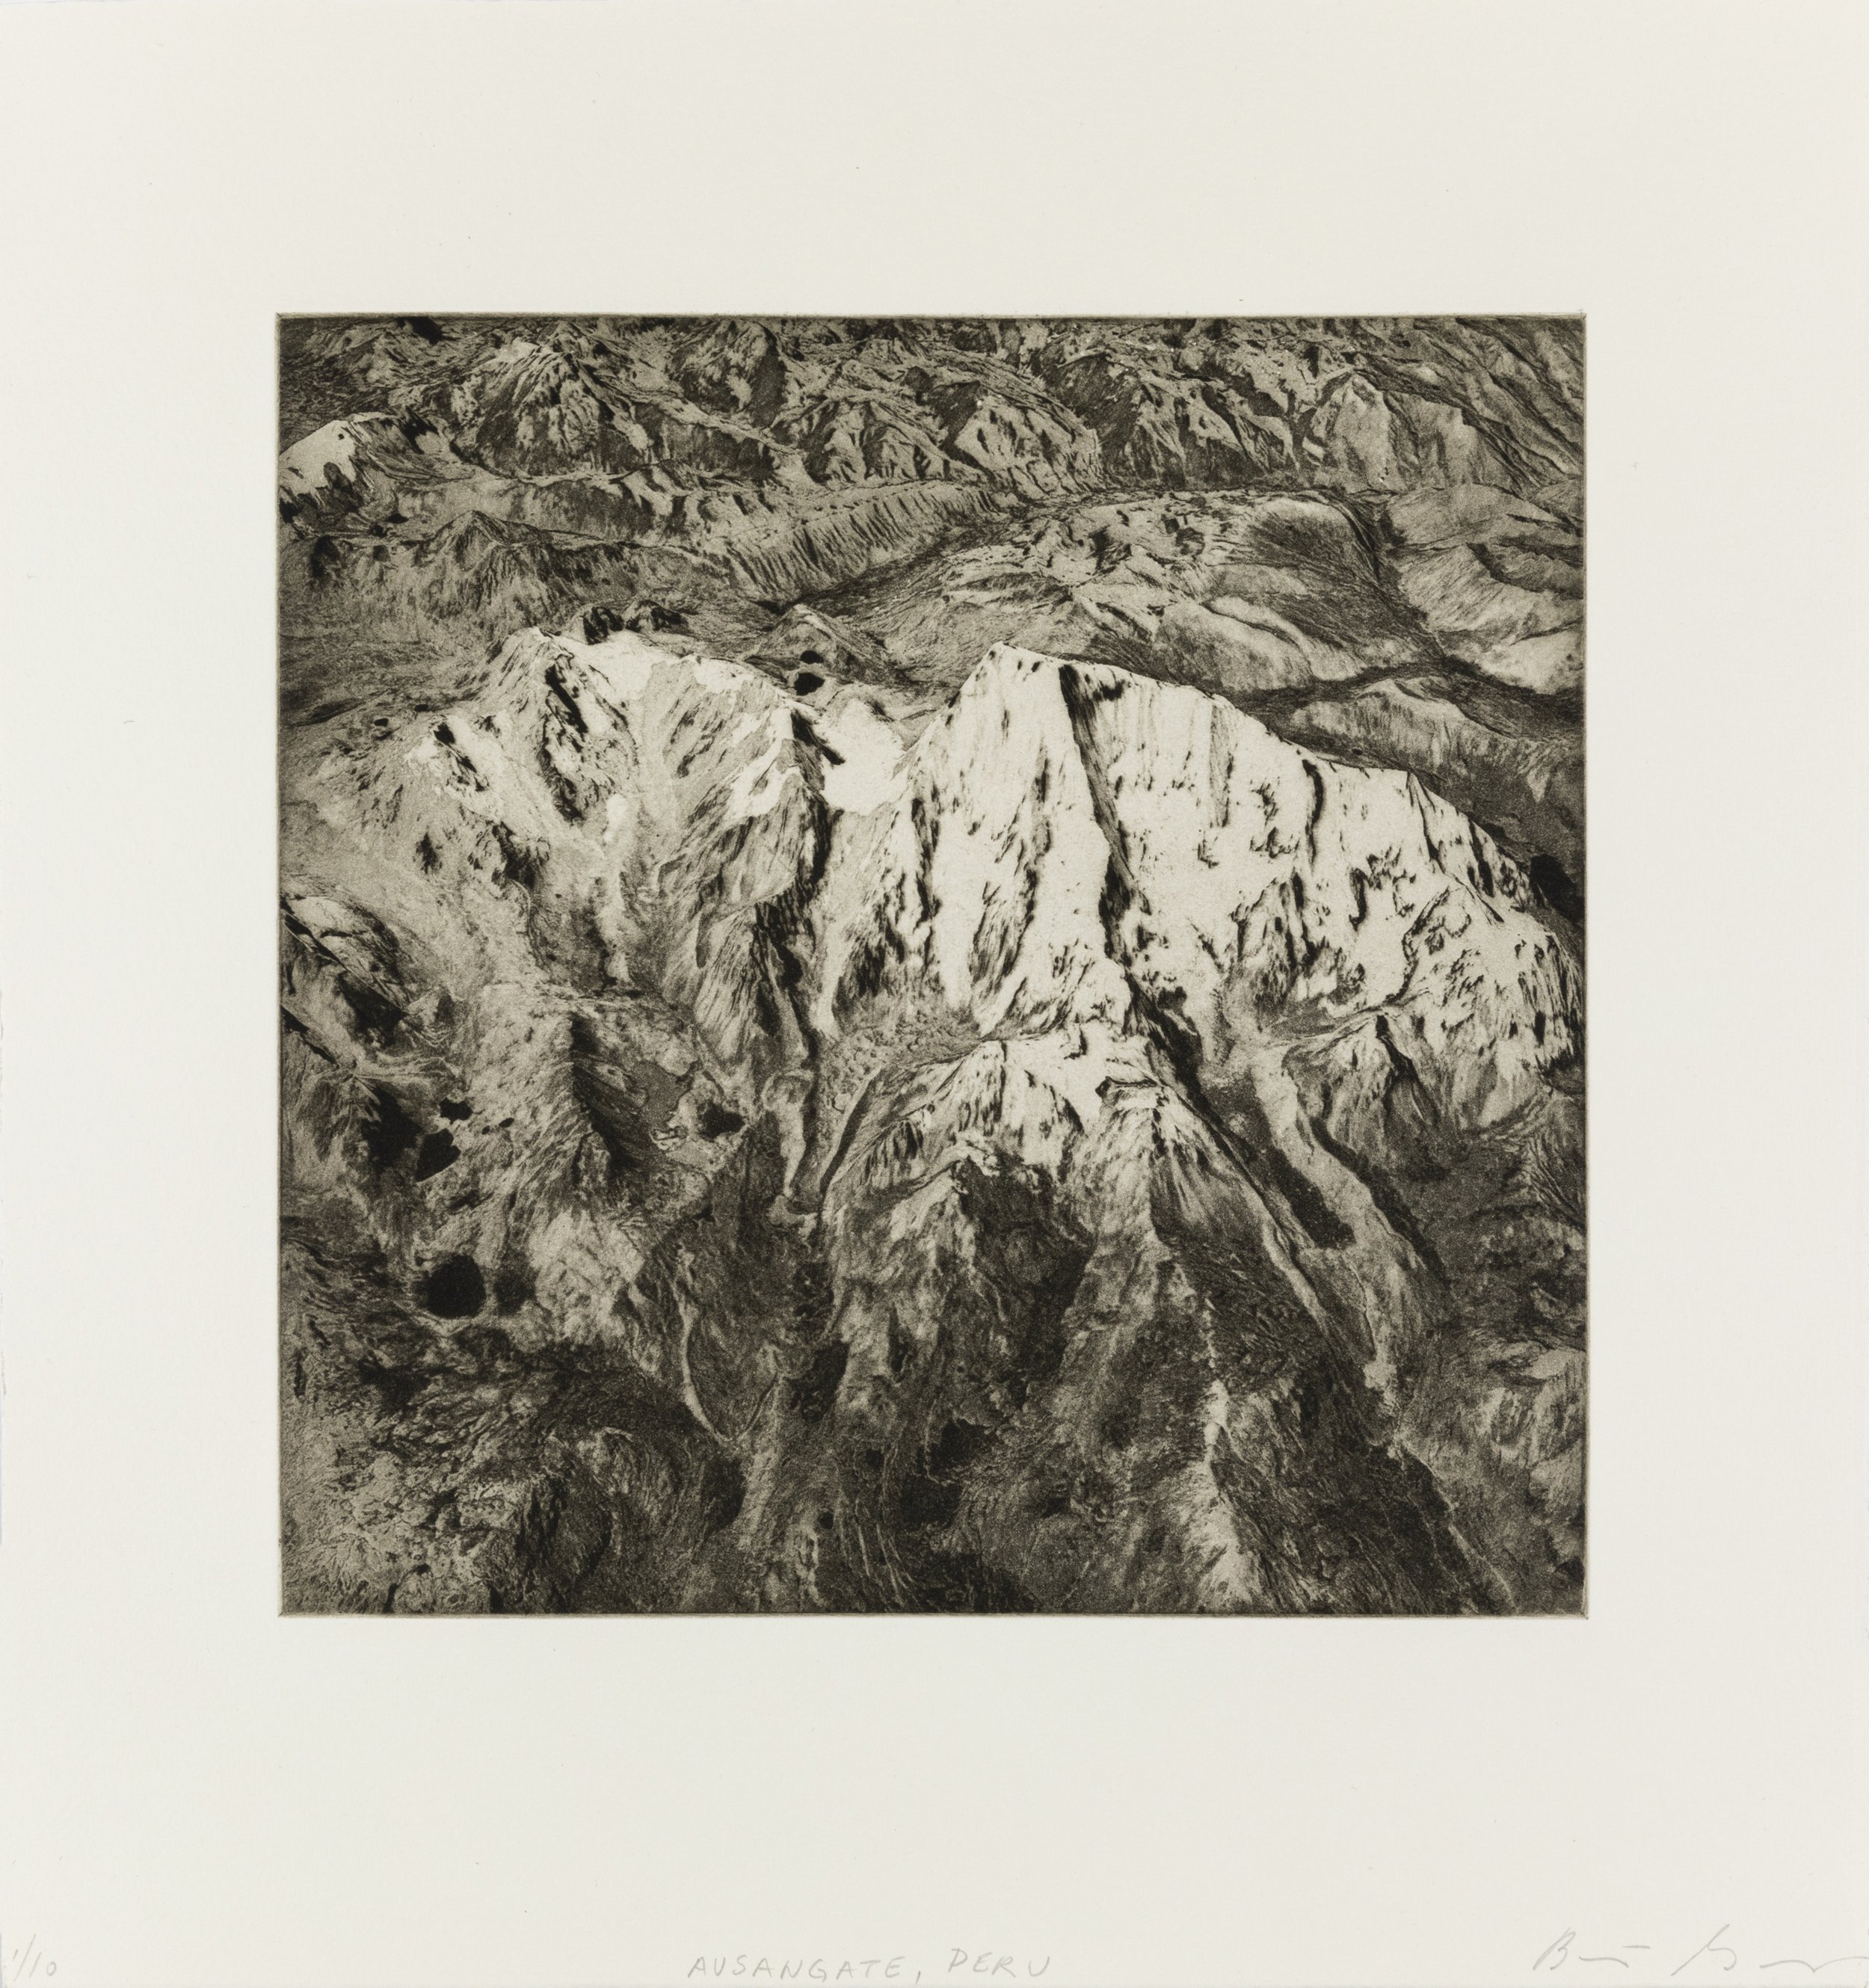    Ausangate, Peru, 2021   Copperplate photogravure etching on cotton rag paper, plate size; 10.6 x 10.6, paper size; 16 x 15.5, edition 10  